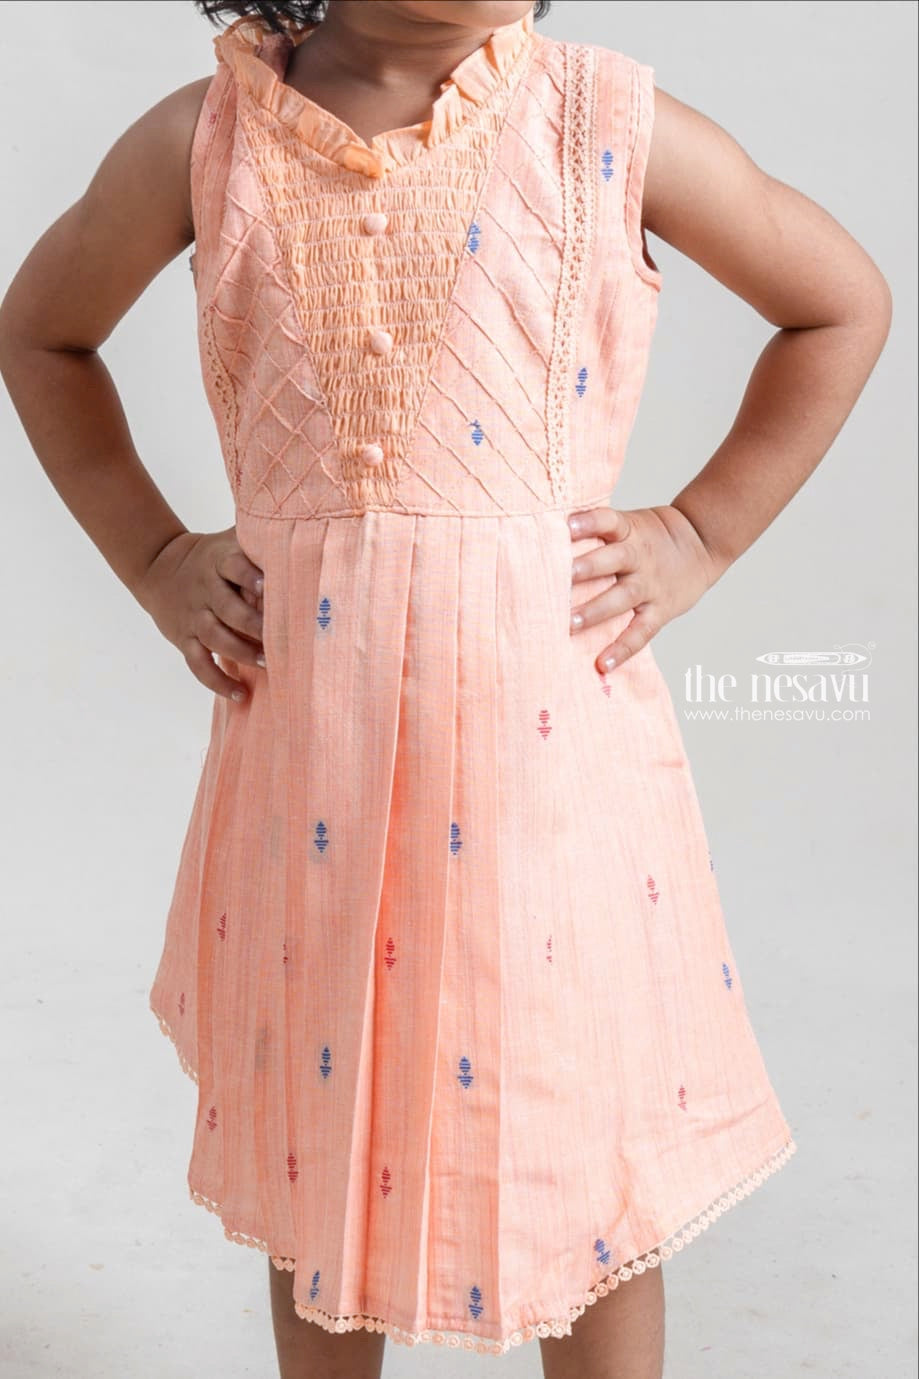 The Nesavu Girls Cotton Frock Charming Orange Sleeveless Pleated Casual Cotton Frock For Girls Nesavu Fantastic Cotton Frocks For Girls | Latest Girls Frock Collection | The Nesavu